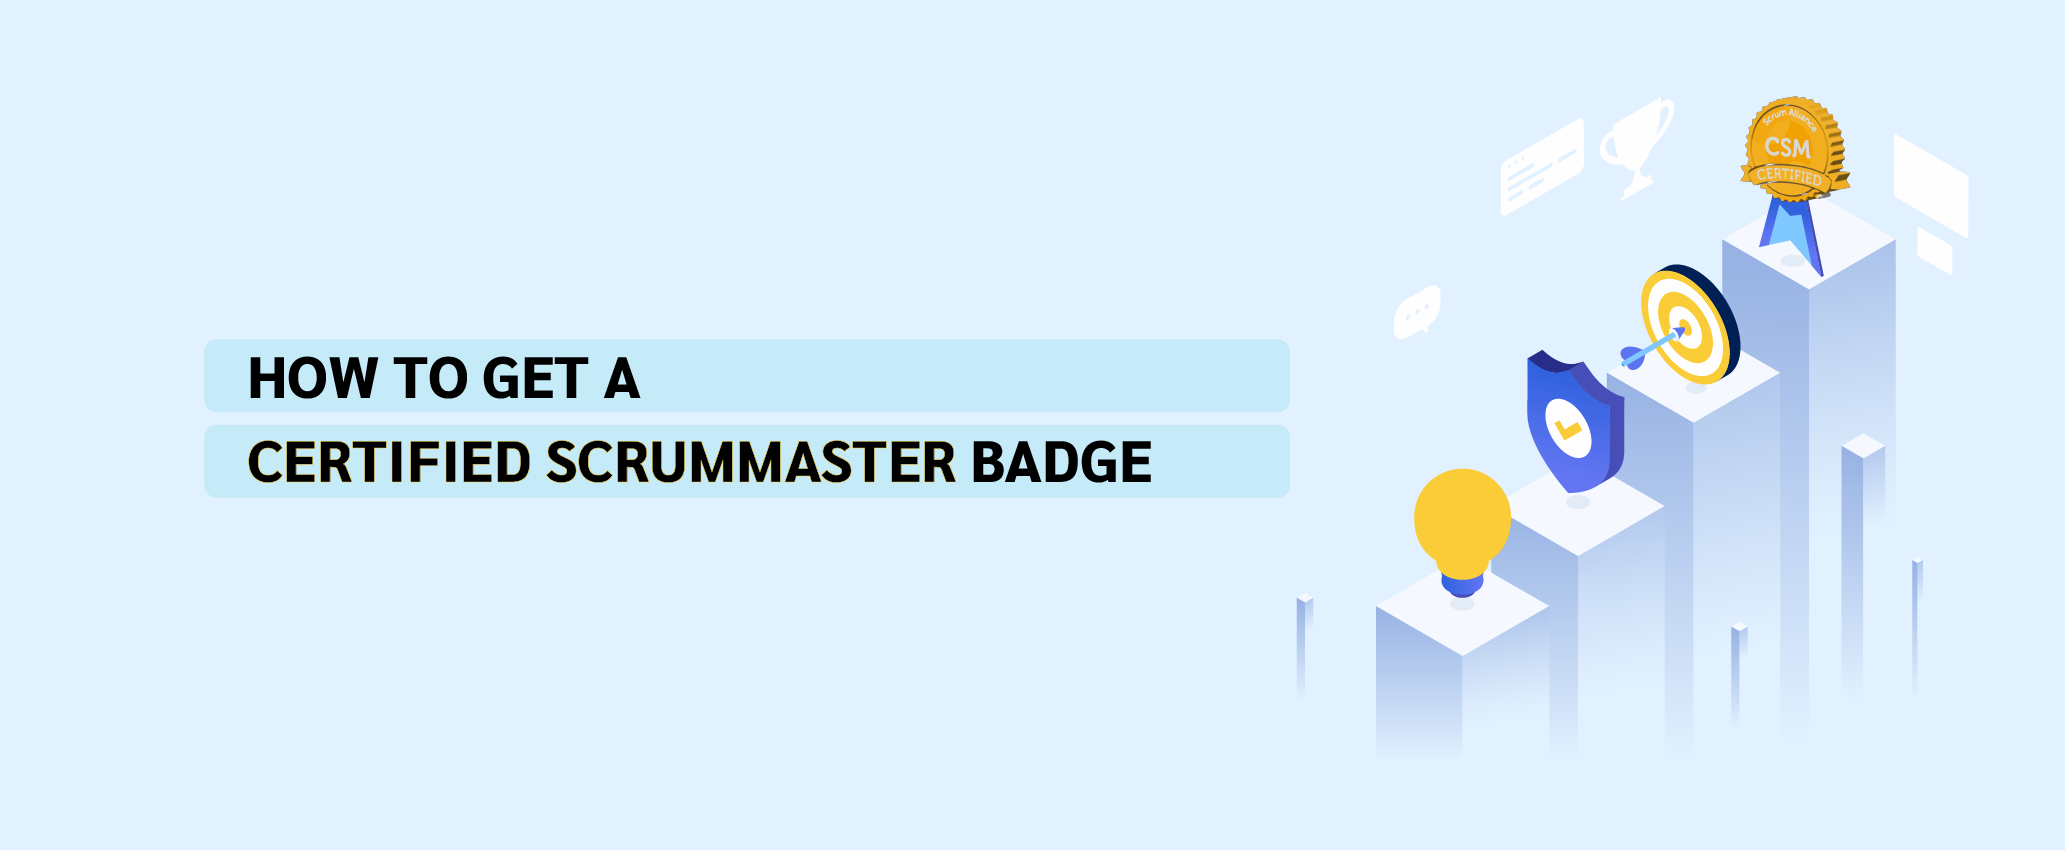 How to Get a Certified Scrum Master Badge